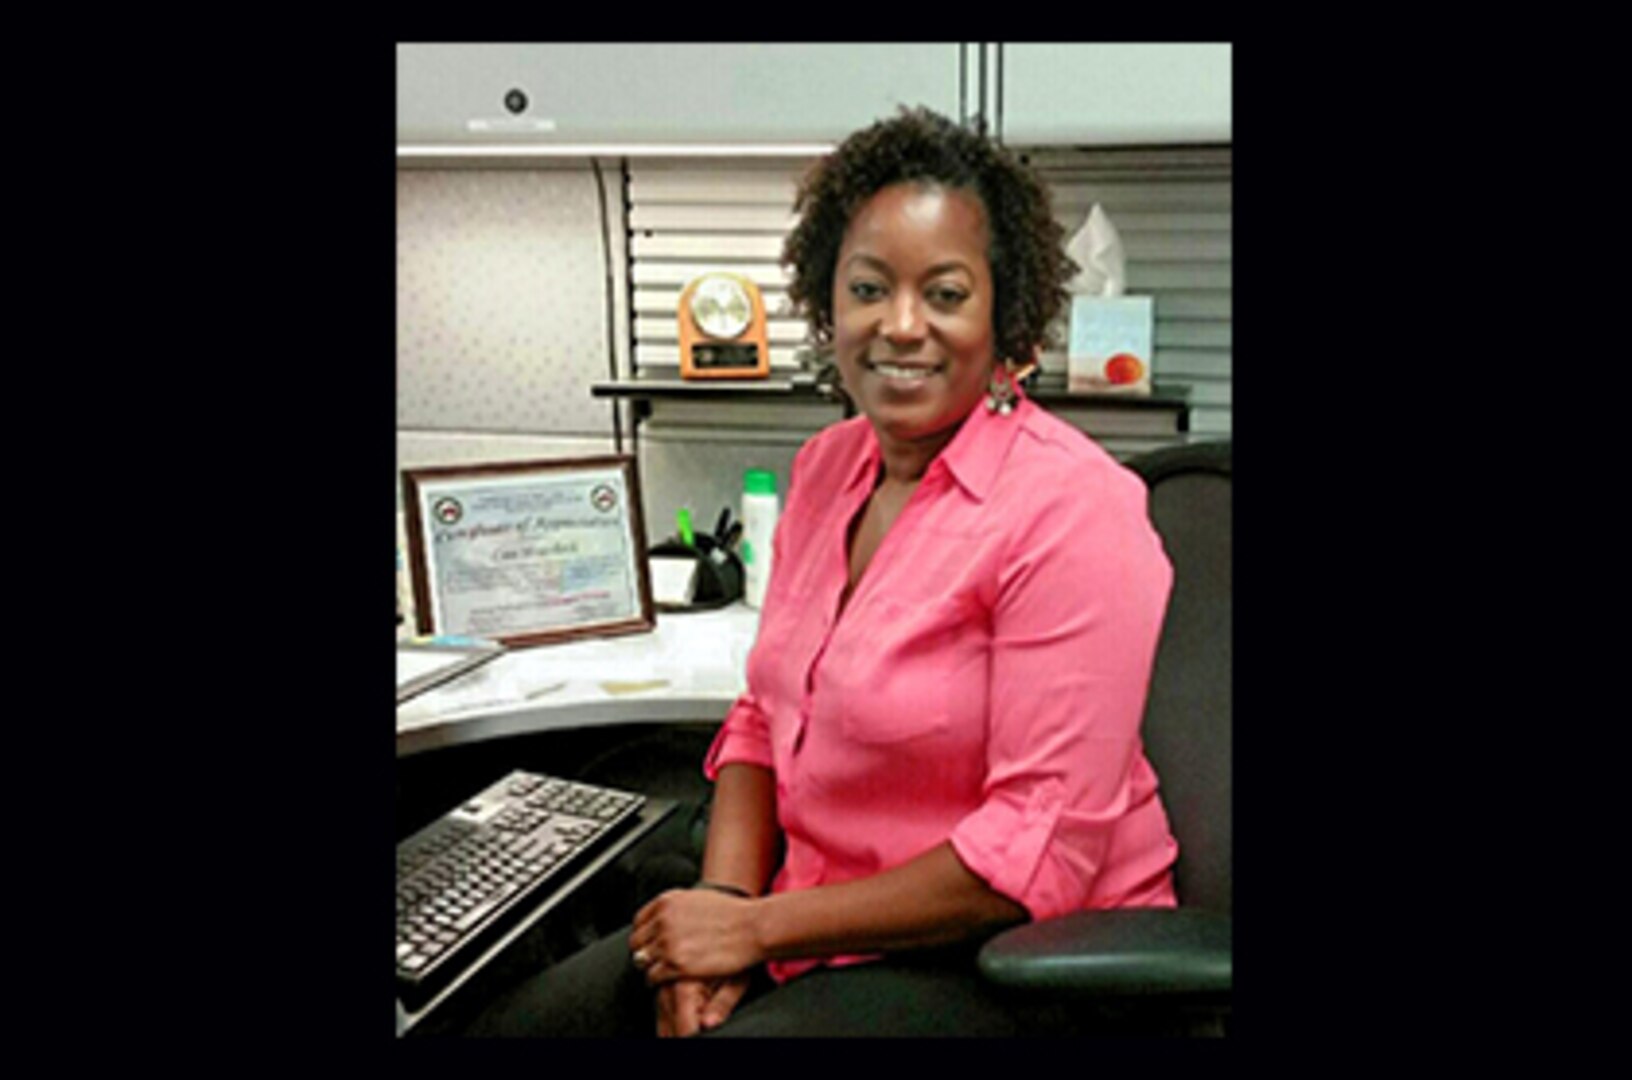 This week’s Employee Spotlight shines on Lisa Hosecloth, a customer support manager at Defense Logistics Agency Aviation at Warner Robins, Georgia.